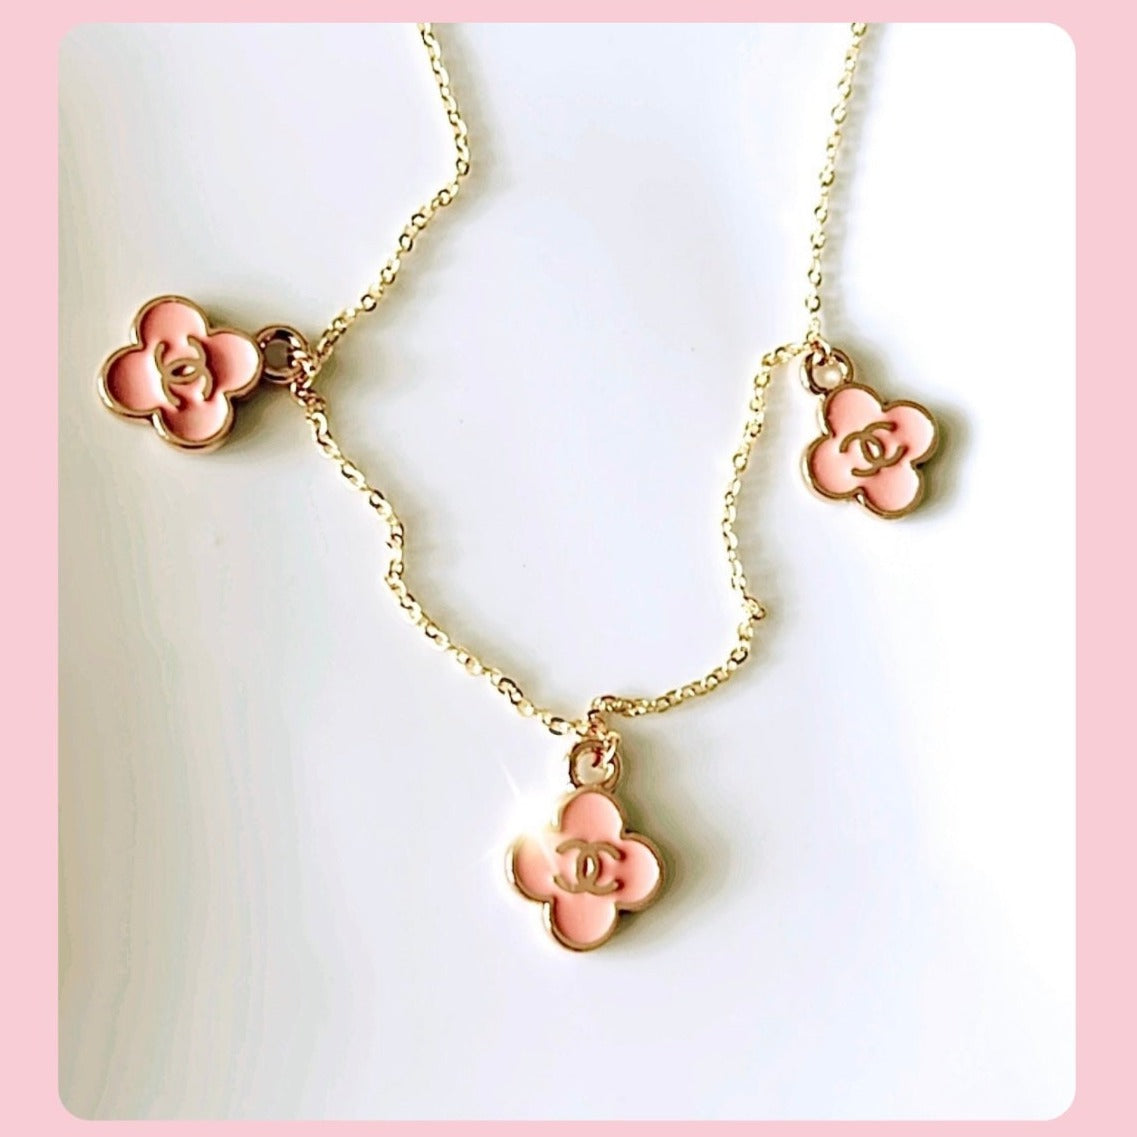 The Mini Flower Charm Necklace in Pink